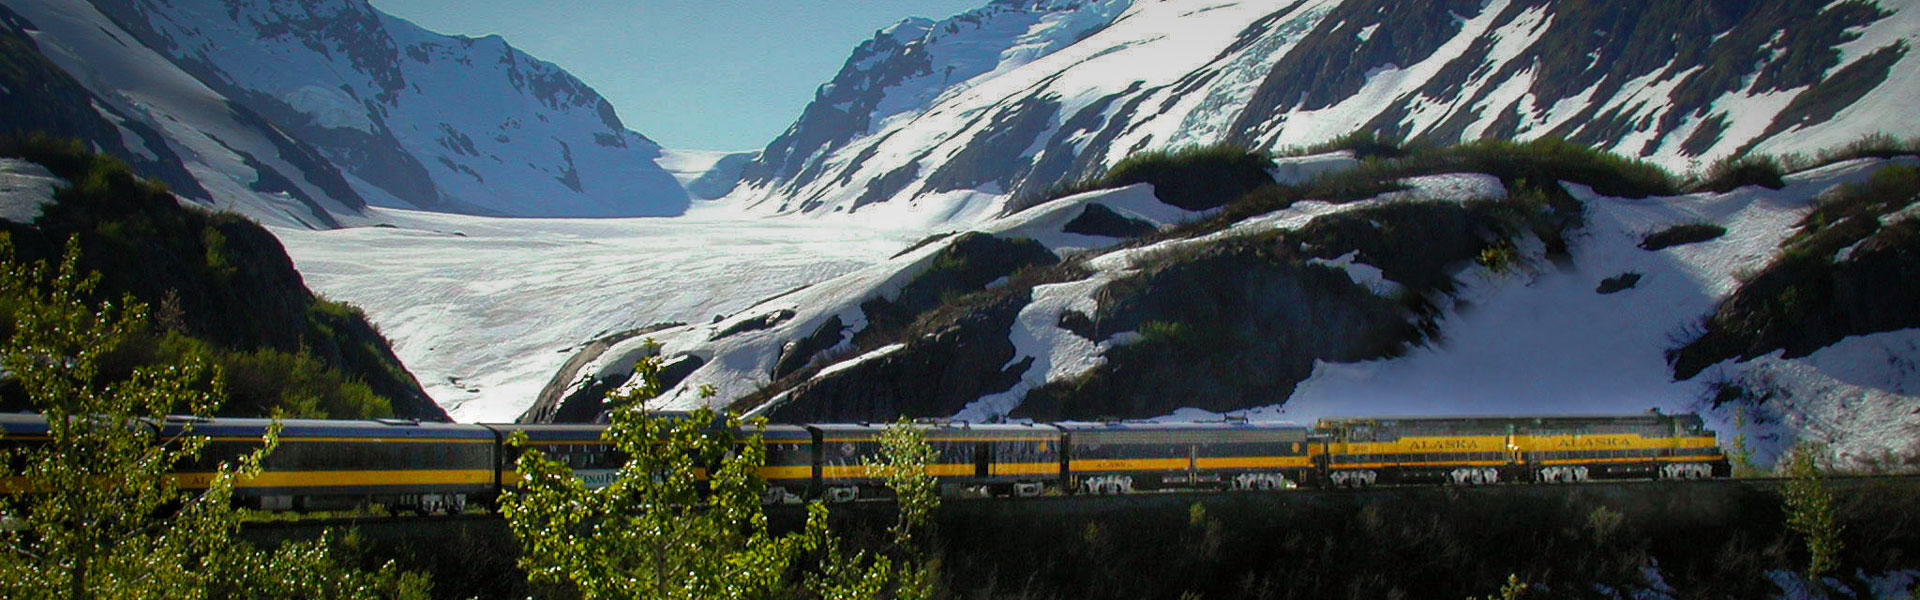 Pre / Post Cruise Alaska Tours | Top 10 Scenic Places to Visit